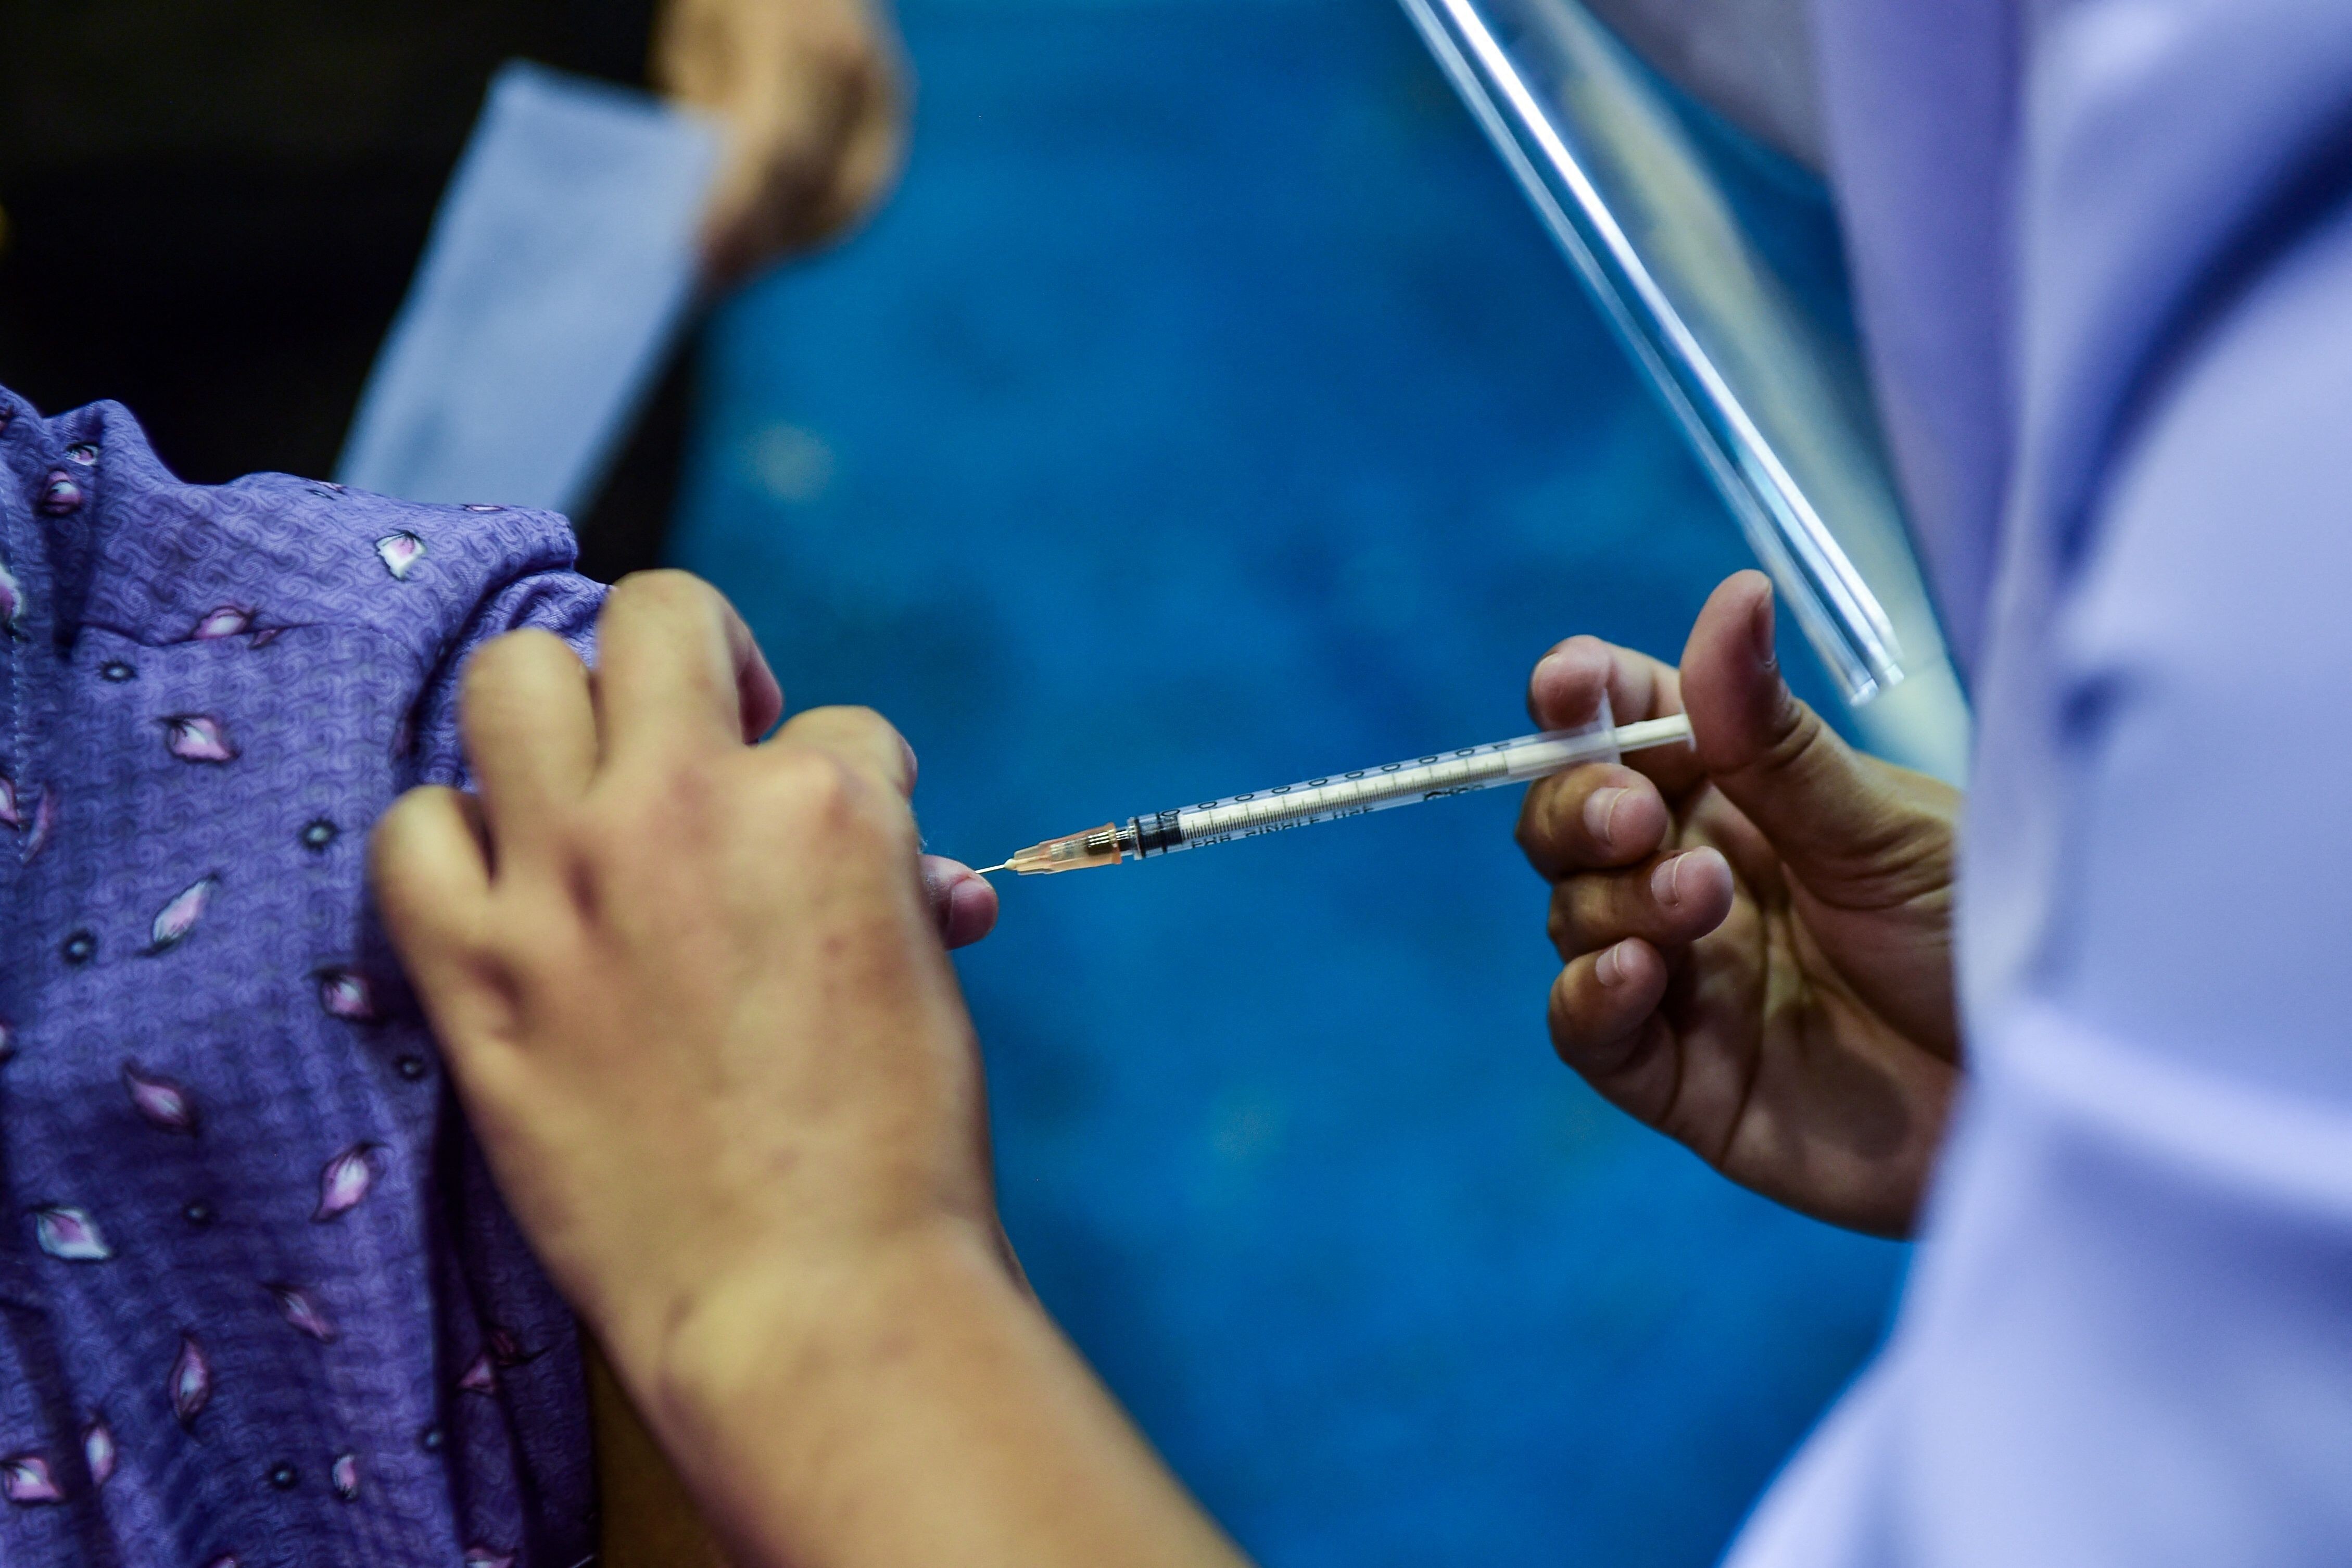 A nurse administers a dose of a Covid-19 vaccine at a hospital in the southern province of Narathiwat on June 7. Less that 5 per cent of Narathiwat and Yala’s 1.1 million population have received a jab so far. Photo: AFP